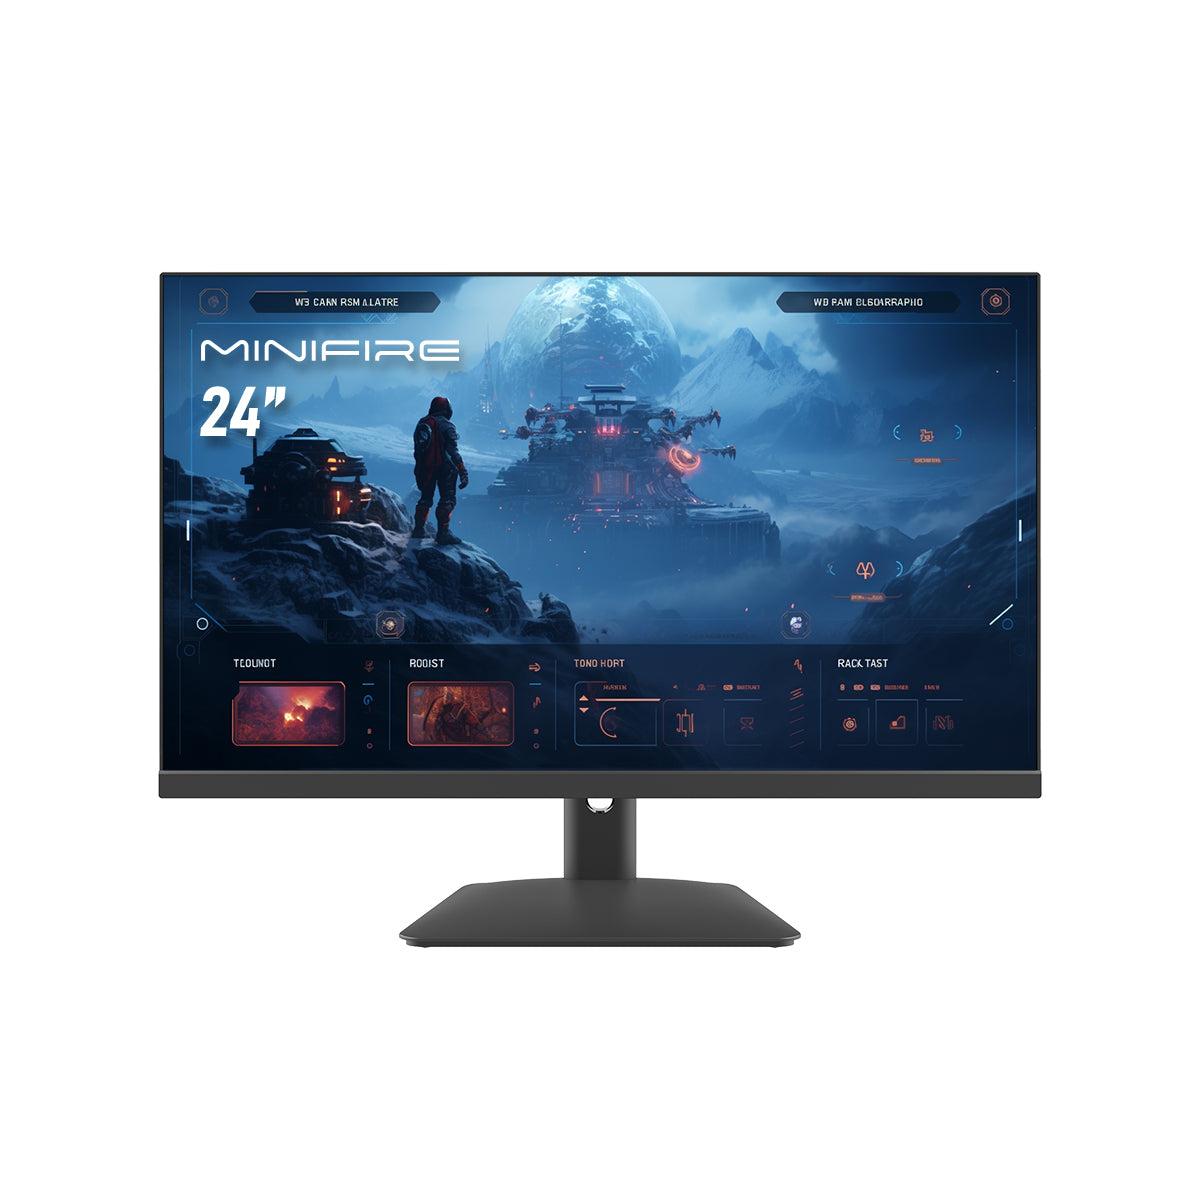 The front of 24 inch IPS Minifire Gaming Monitor 